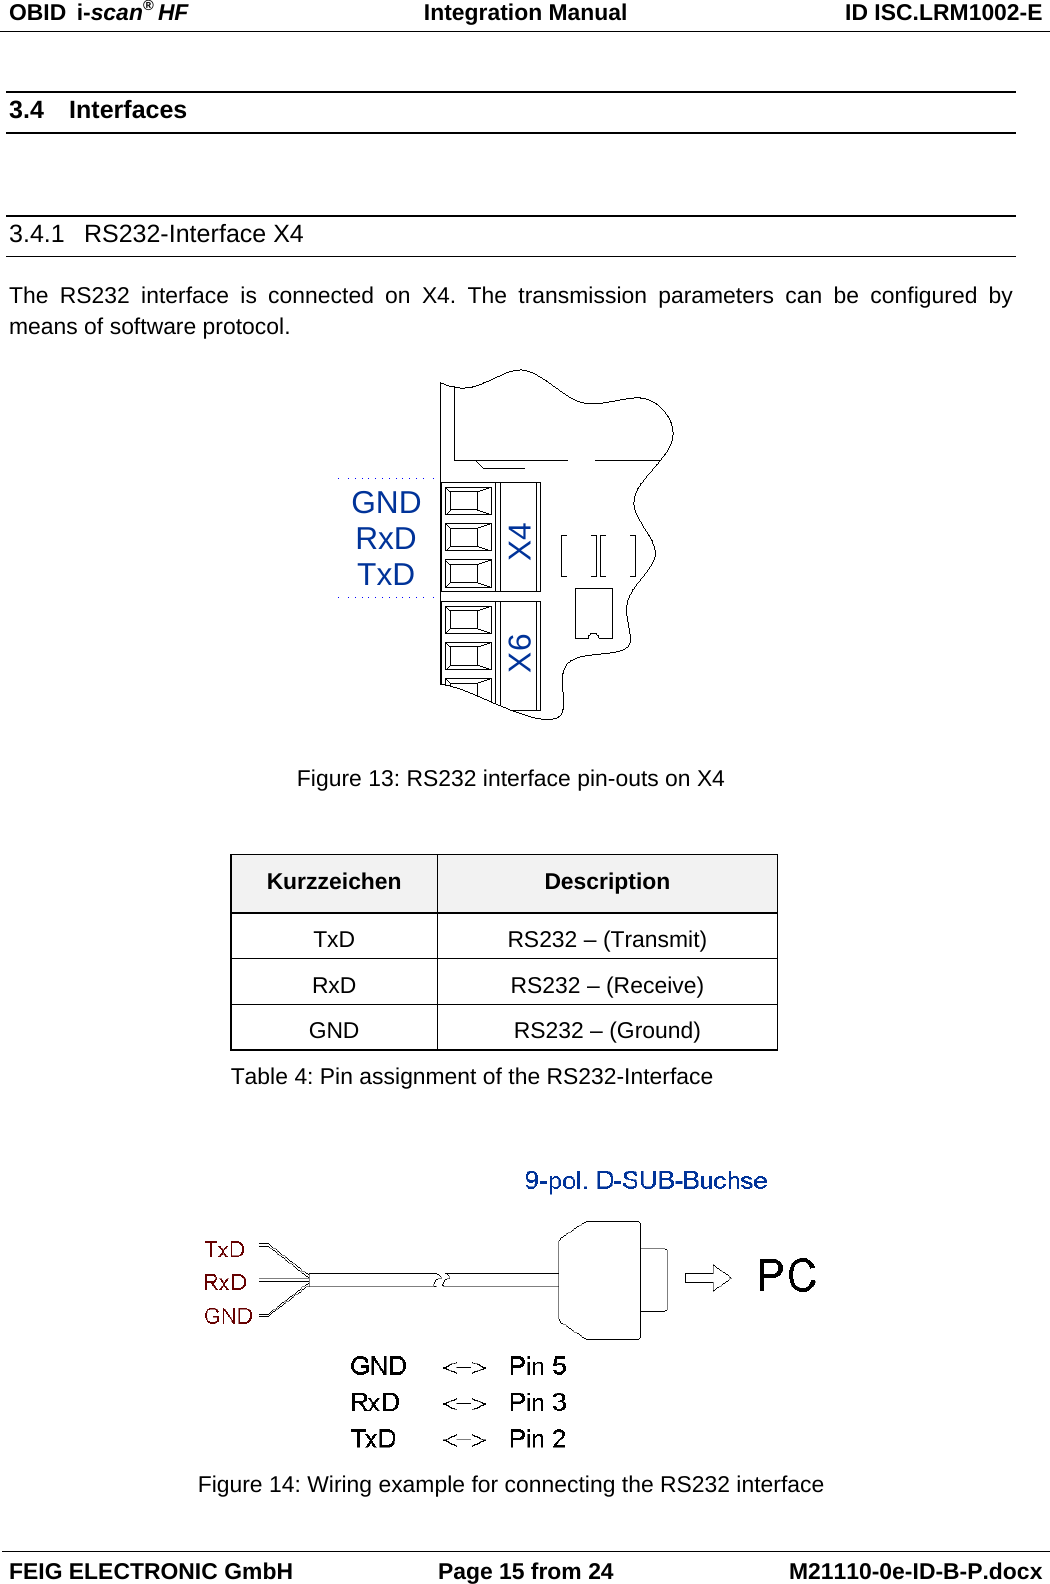 OBID  i-scan® HF Integration Manual ID ISC.LRM1002-E  FEIG ELECTRONIC GmbH Page 15 from 24 M21110-0e-ID-B-P.docx  3.4 Interfaces  3.4.1 RS232-Interface X4 The RS232 interface is connected on X4. The transmission parameters can be configured by means of software protocol. TxDRxDGNDX4X6 Figure 13: RS232 interface pin-outs on X4  Kurzzeichen Description TxD RS232 – (Transmit) RxD RS232 – (Receive) GND RS232 – (Ground) Table 4: Pin assignment of the RS232-Interface   Figure 14: Wiring example for connecting the RS232 interface 